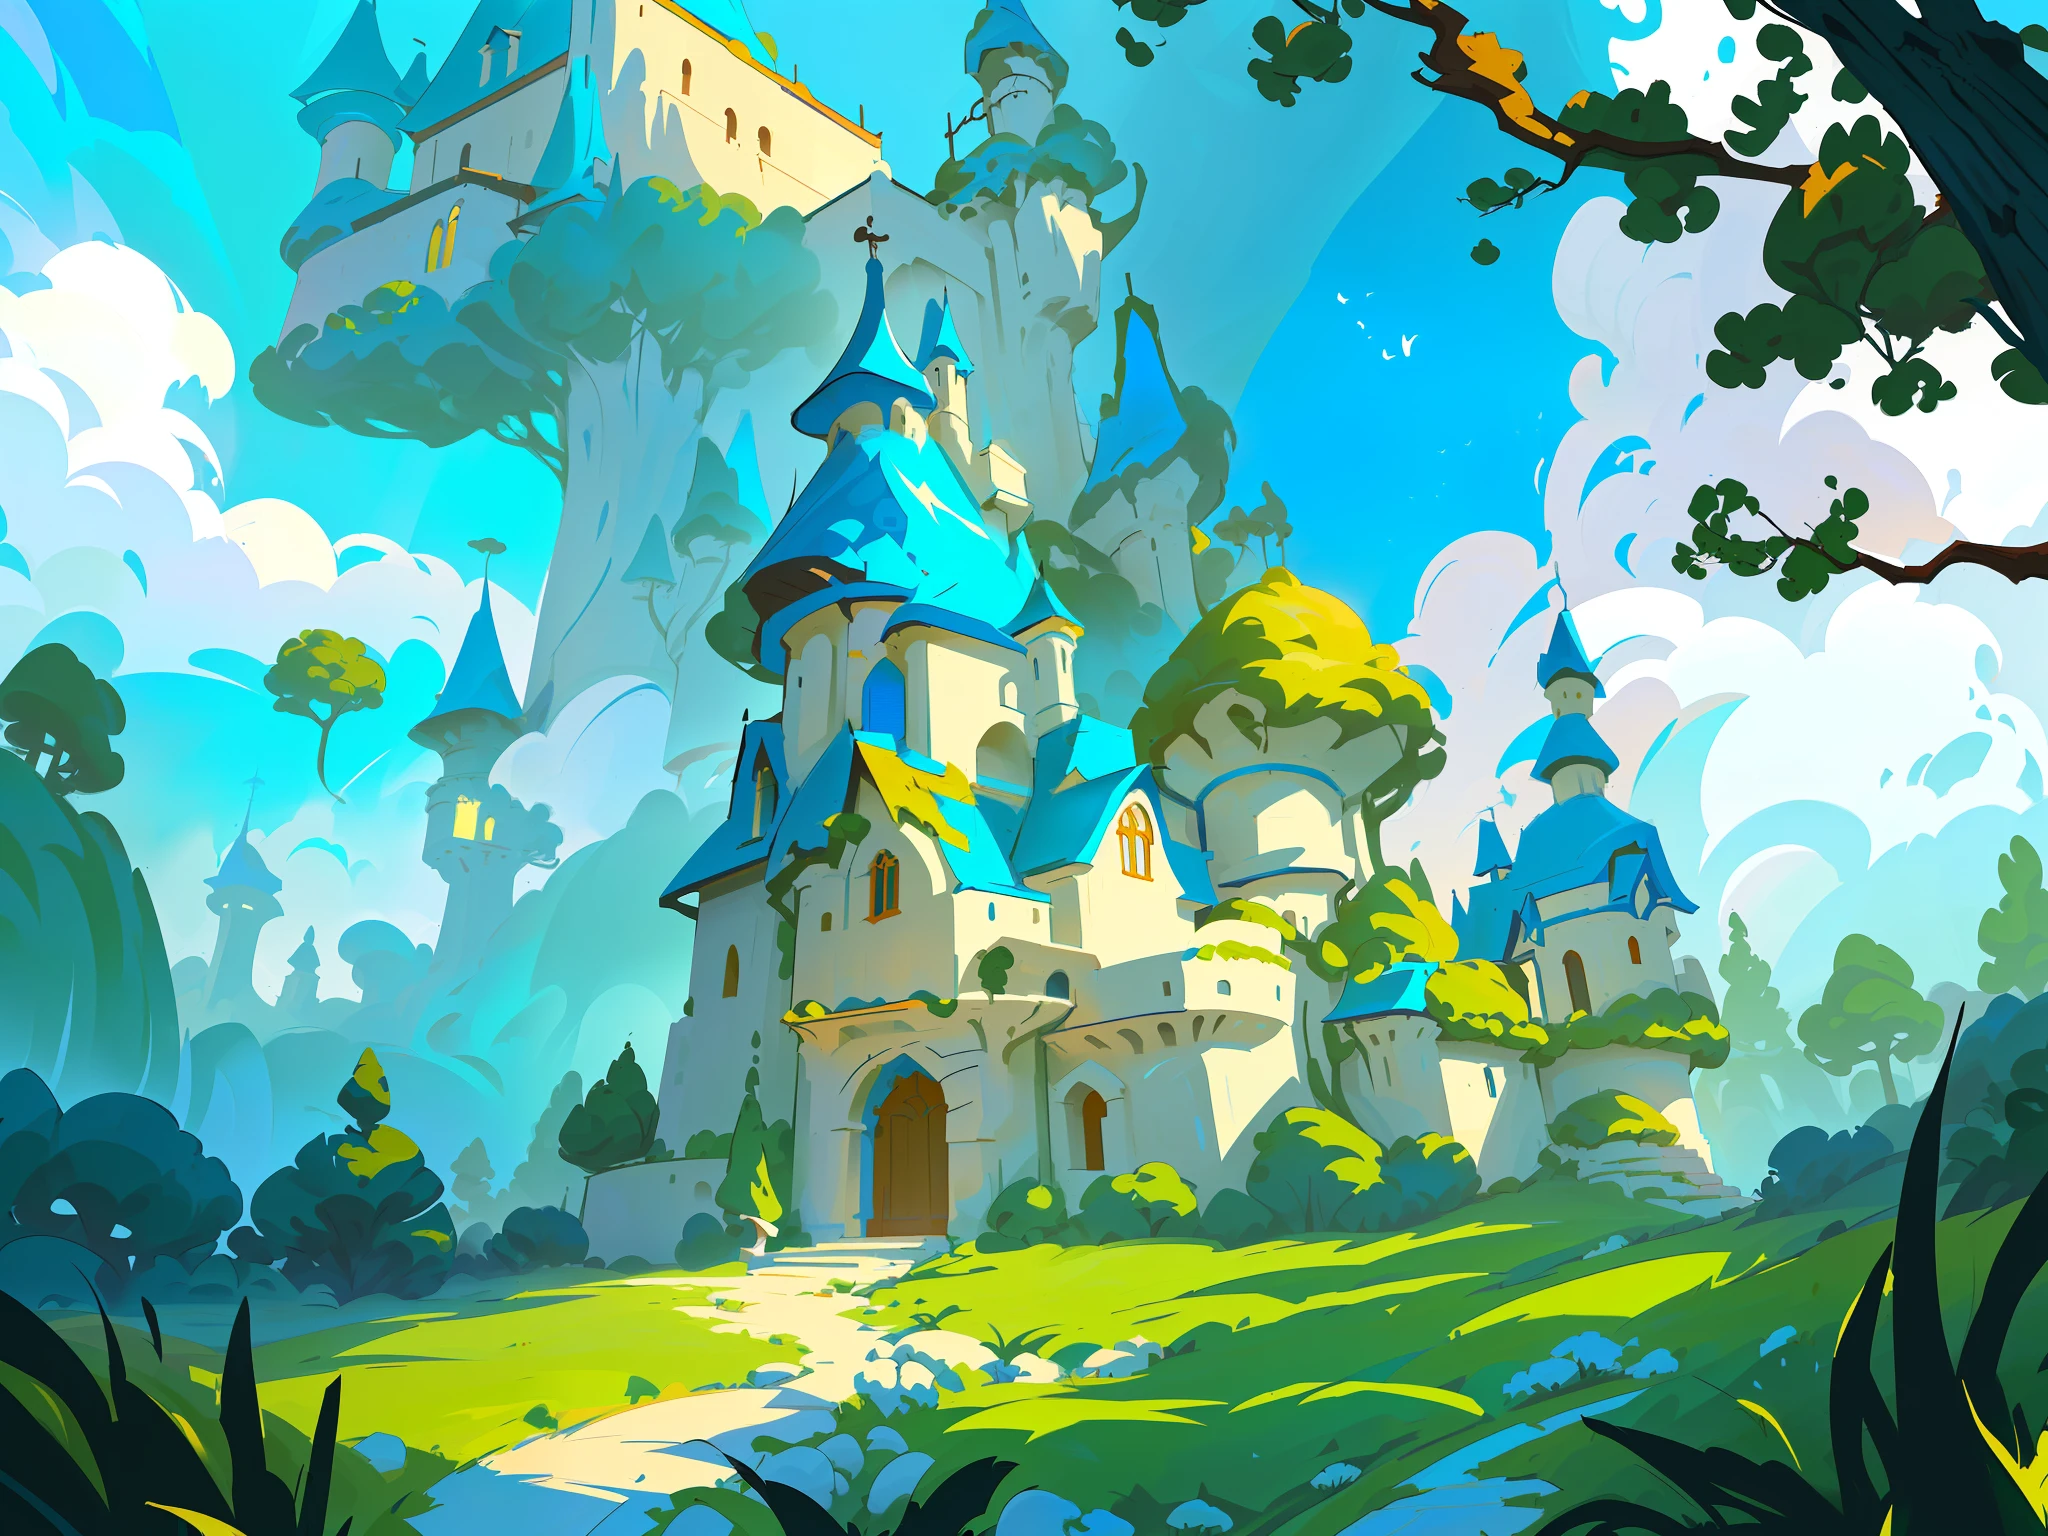 A mushroom castle in the forest, with yellow mushrooms and blue mushrooms, castle and mushrooms combined, blue sky and white clouds, meadow, cartoon style, clean colors, bright colors, CG illustration, HD, cartoon illustration in front of the castle in mushroom style, magical fantasy 2 D concept art, fairy tale illustration style, children's art in ArtStation, fairy tale style background, fantasy game art style, beautiful artwork illustration, fantasy world concept, colorful concept art, digital 2d fantasy art, background art, mobile game art, fairy tale artwork